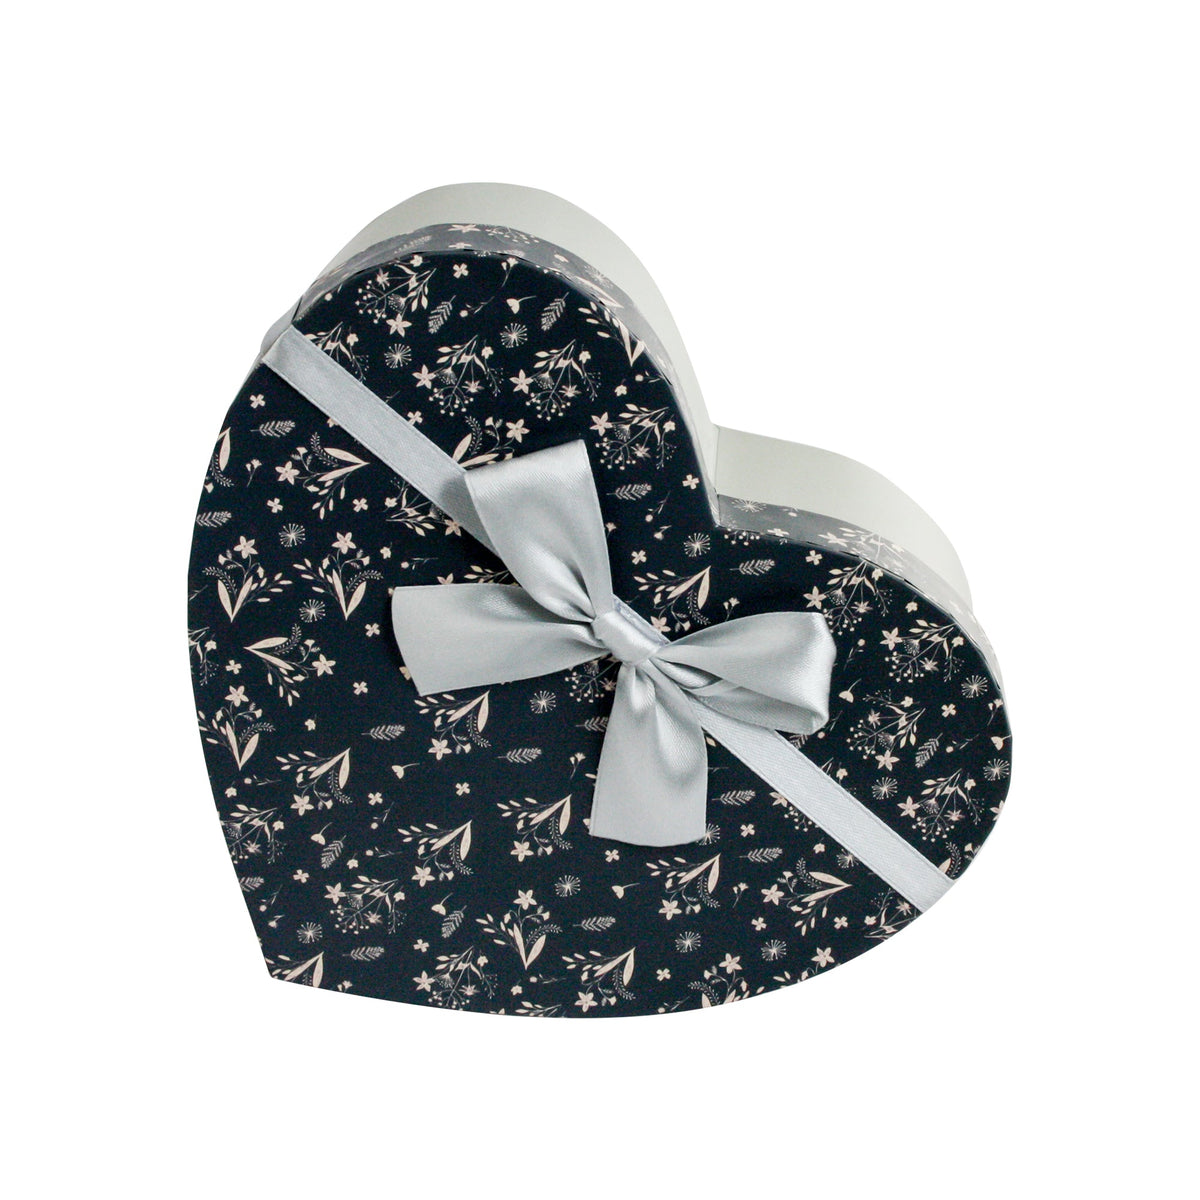 Single Grey Floral Gift Box with Grey Satin Ribbon (Sizes Available)